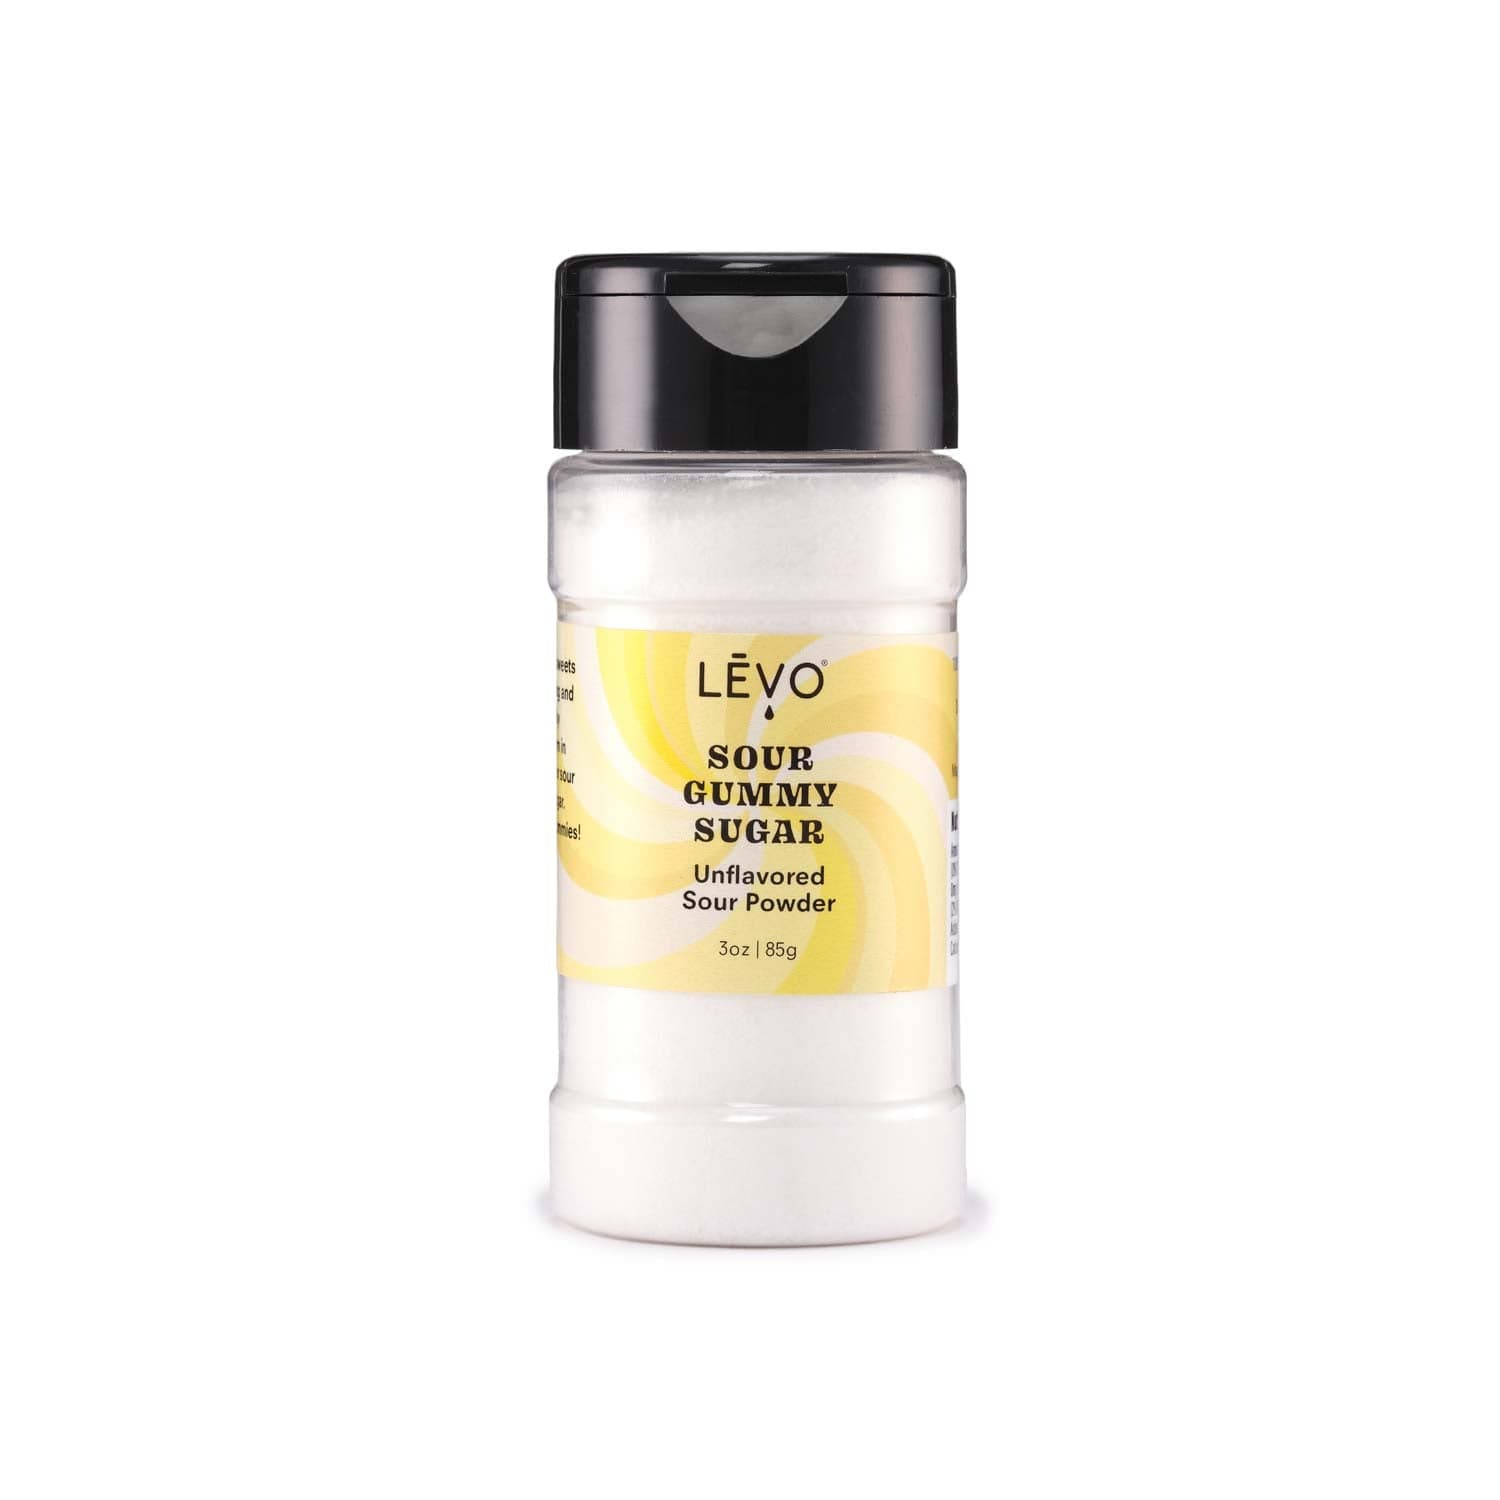 LEVO sour gummy sugar unflavored sour powder. Enhance your gummy experience with the Gummy Decorating Kit's Edible Glitter, Shimmer, and Sour Sugars.